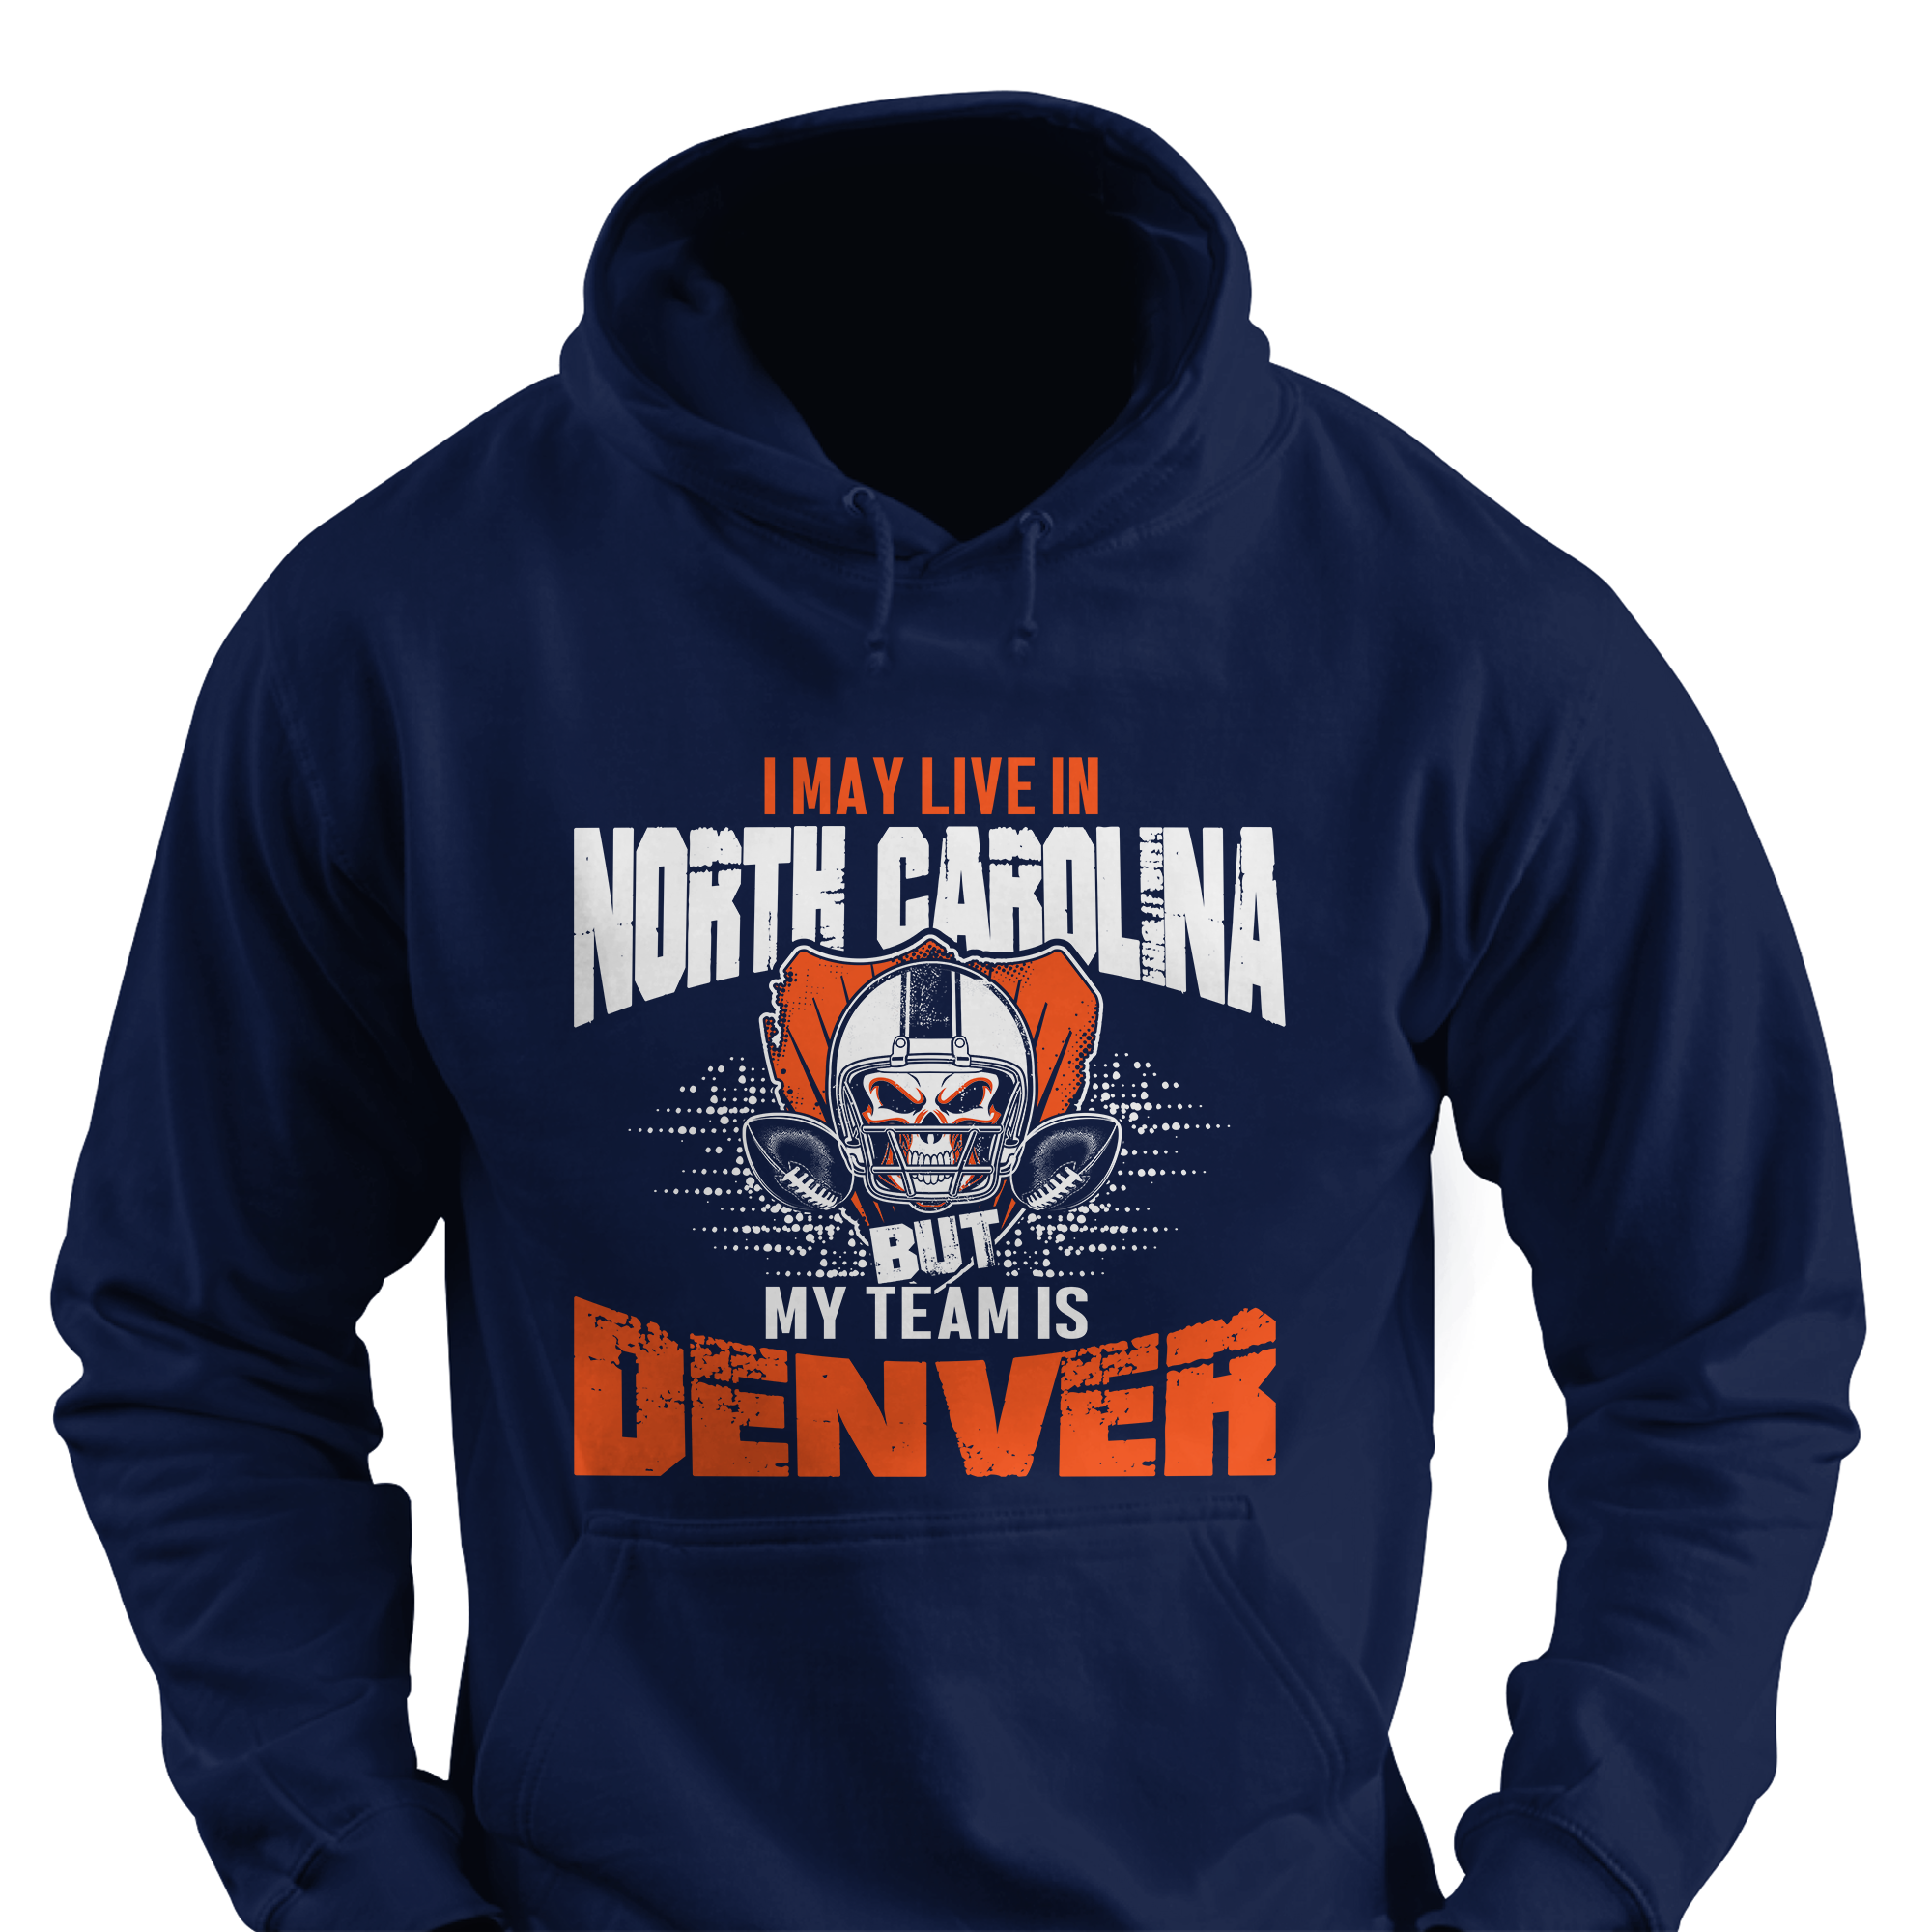 I May Live in North Carolina but My Team is Denver